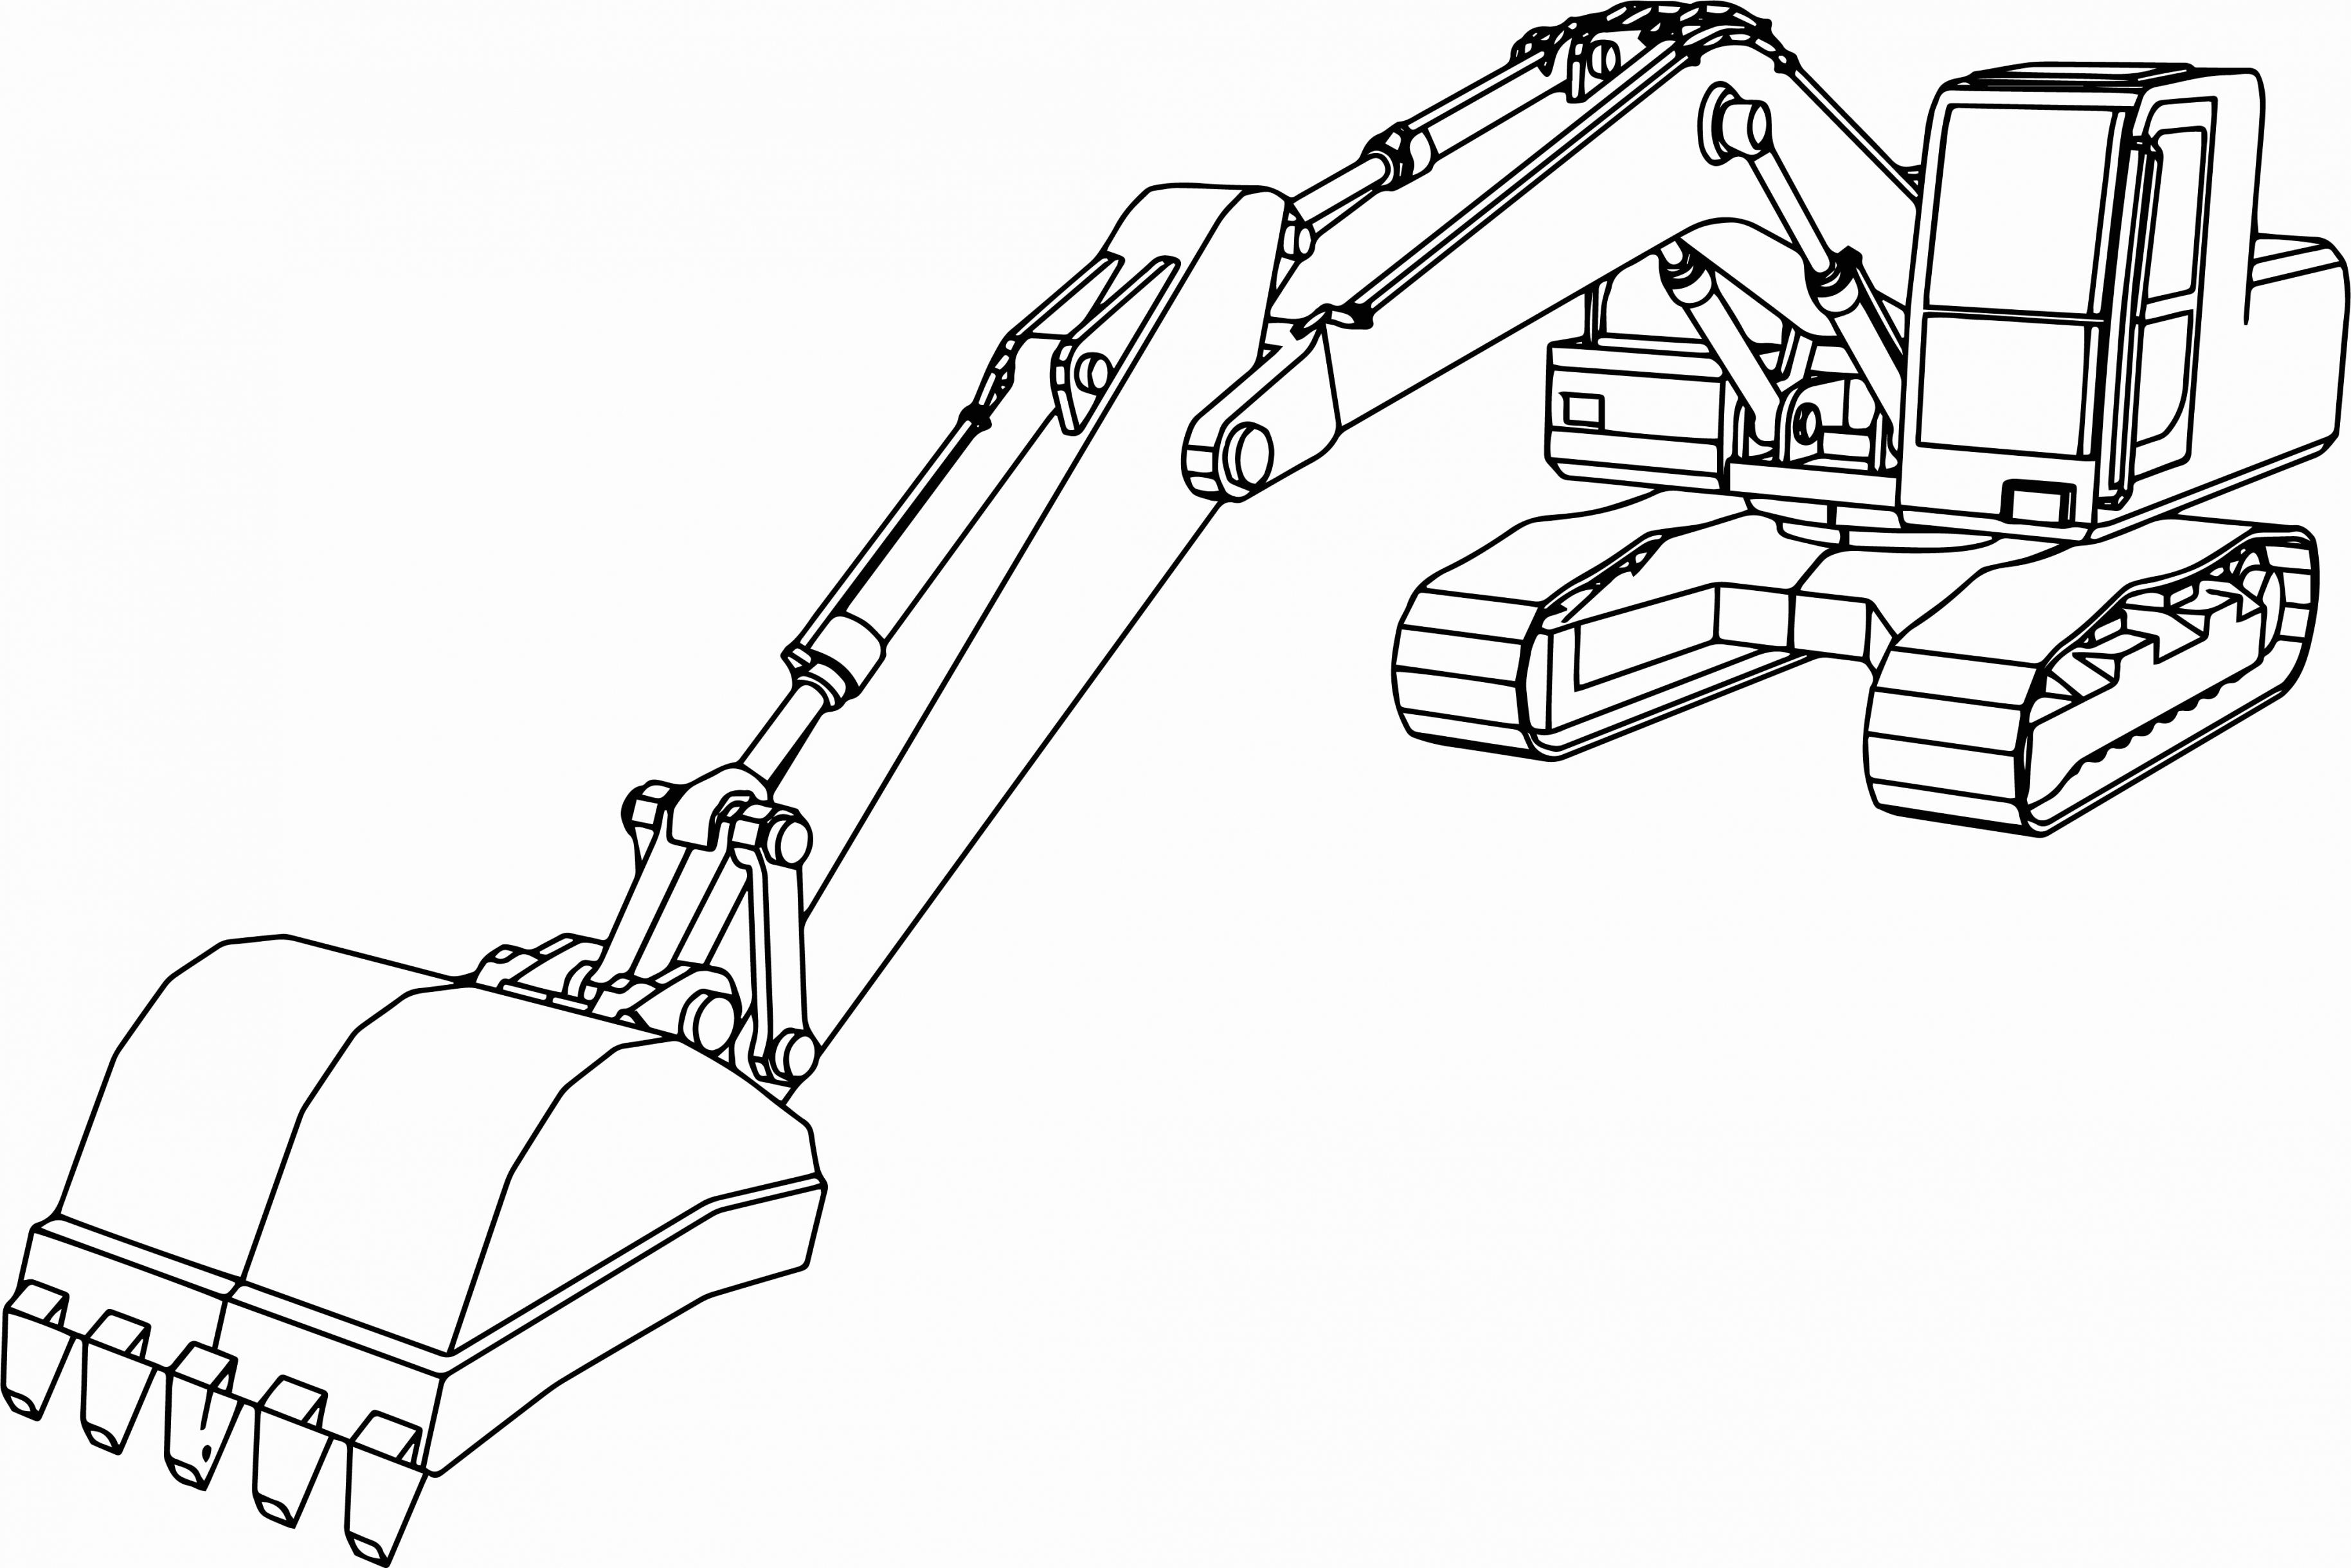 Coloring Pages : Attractive Excavator Coloring Page Grave ...